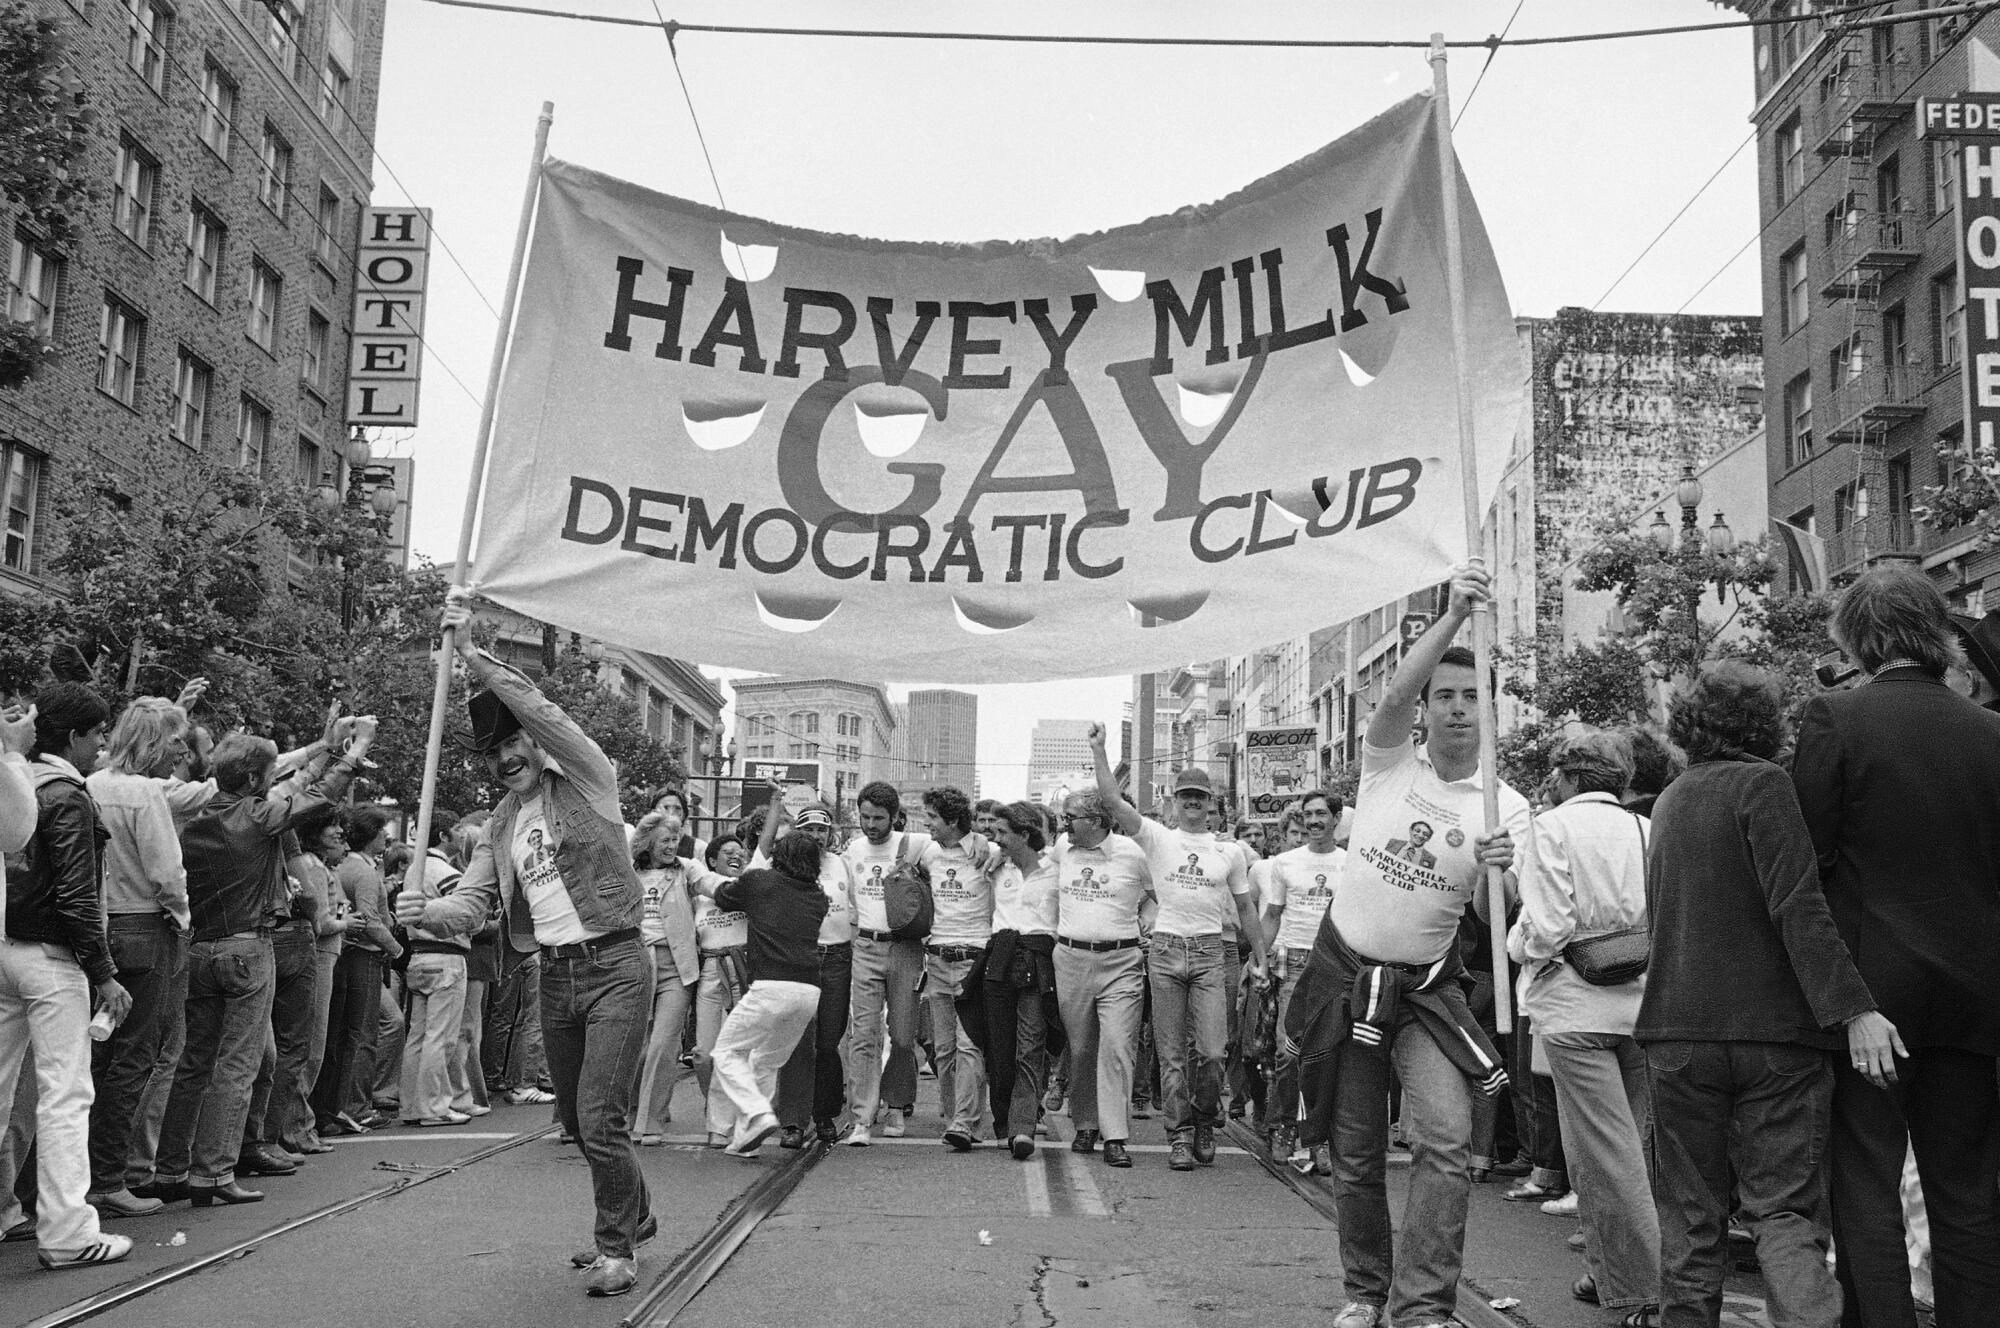 Members of the Harvey Milk Gay Democratic Club from San Francisco parade down Market Street in1979.